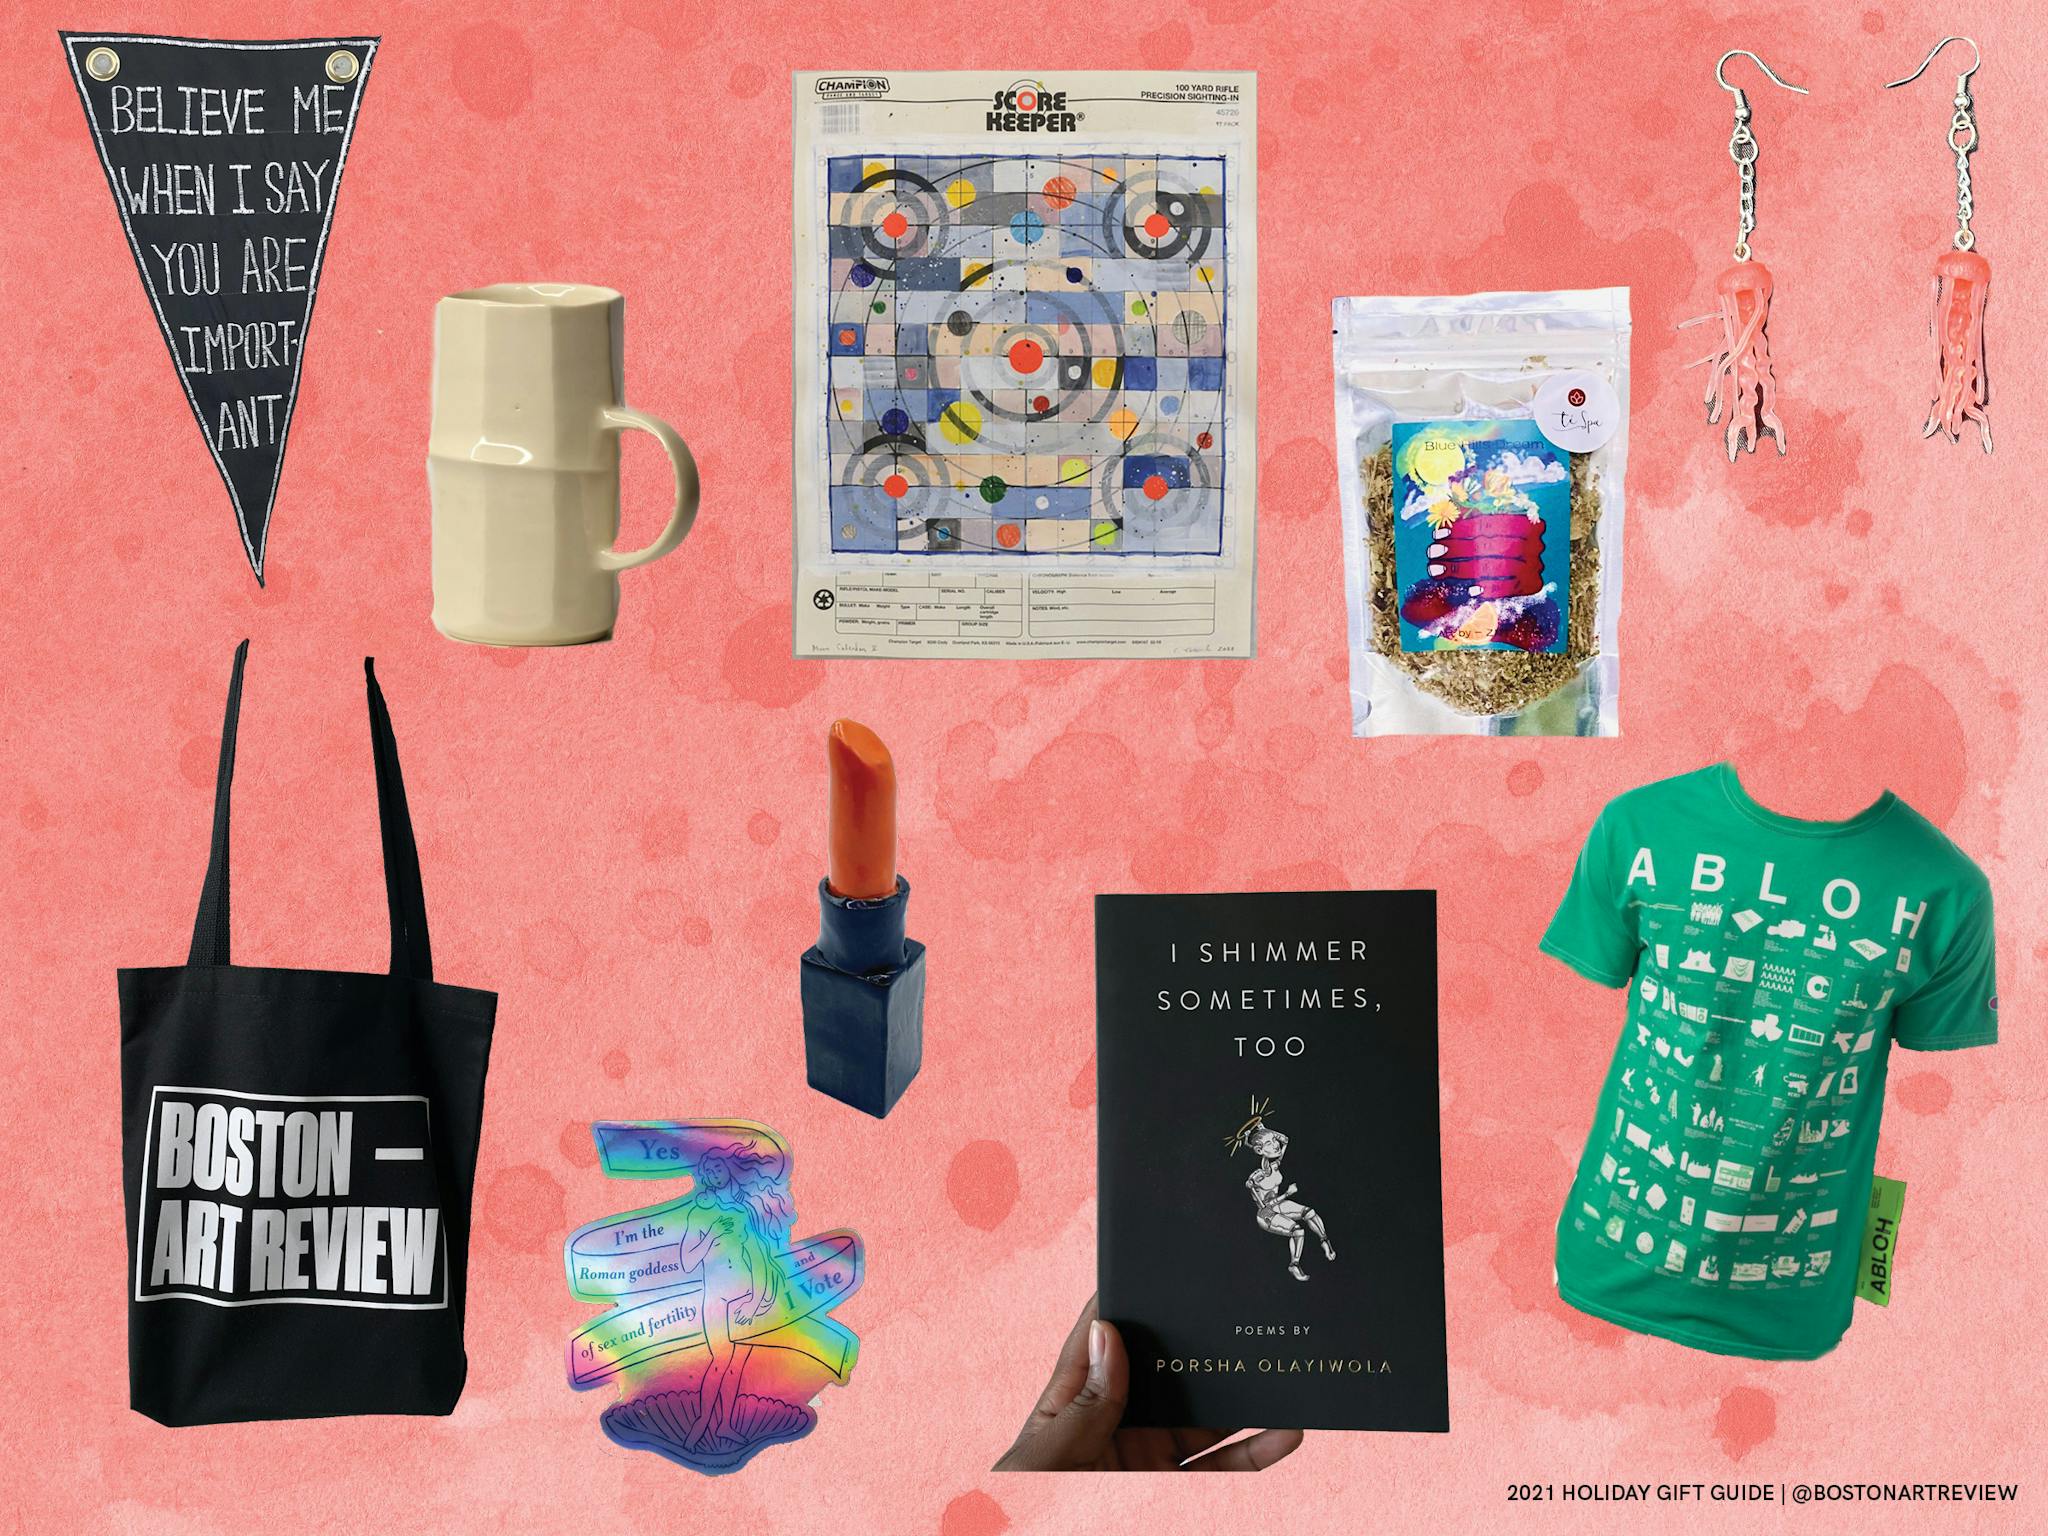 Gift ideas, including lipstick, a book, a bag, and apparel, featured against a rose colored background.